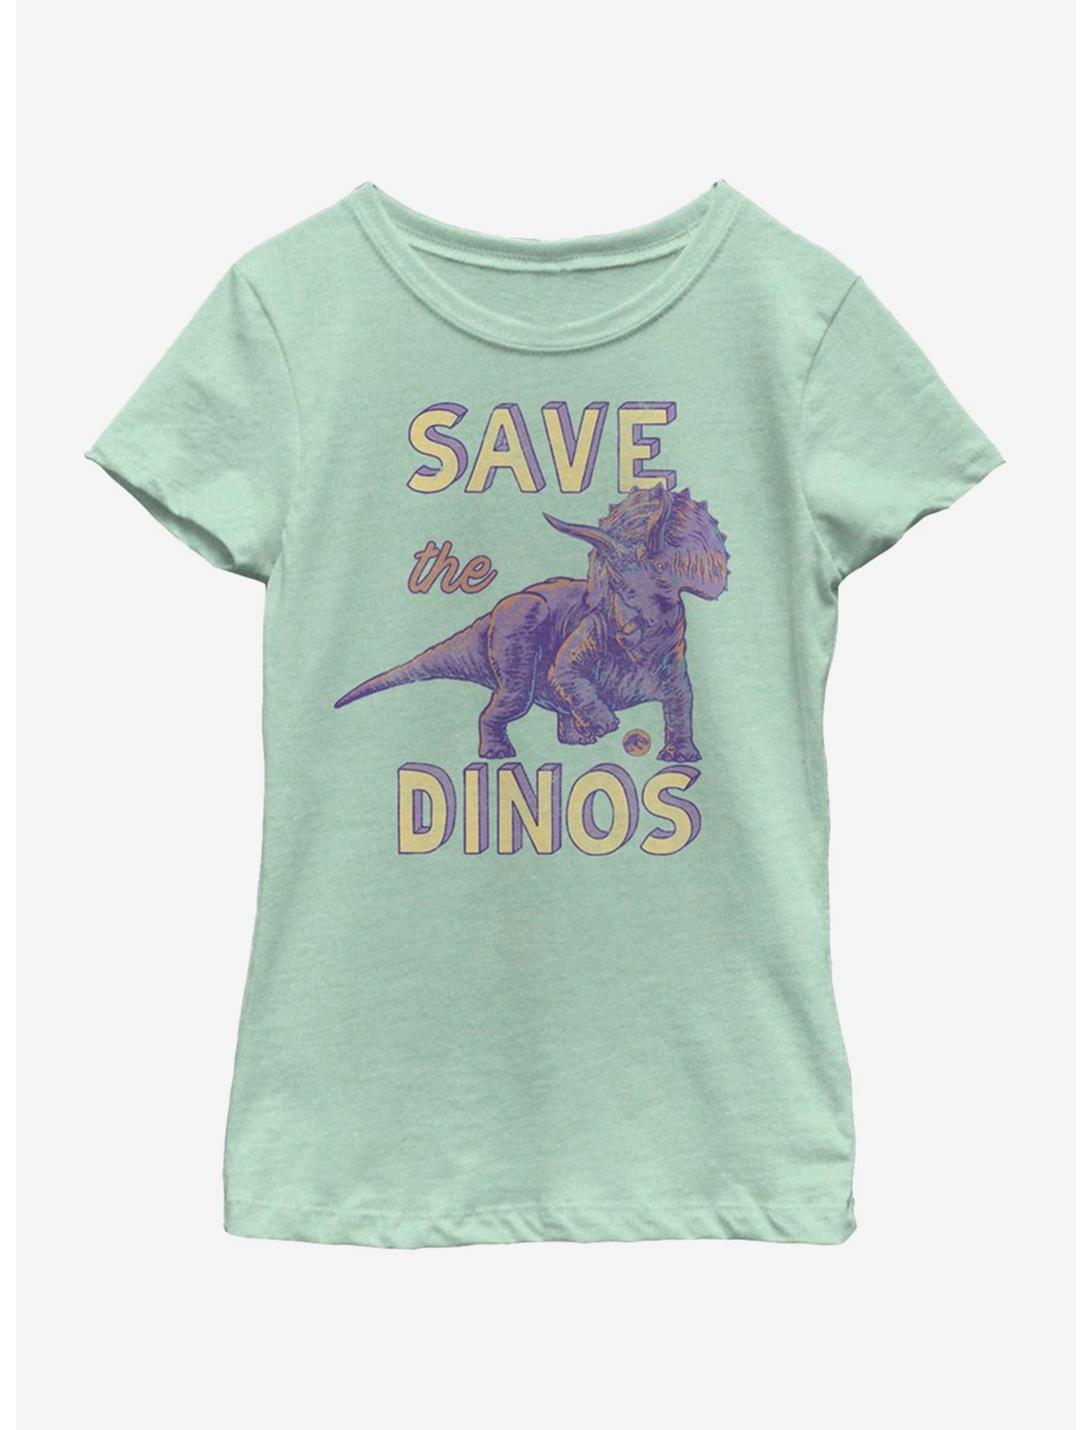 Jurassic Park Save the Dinos Youth Girls T-Shirt, MINT, hi-res